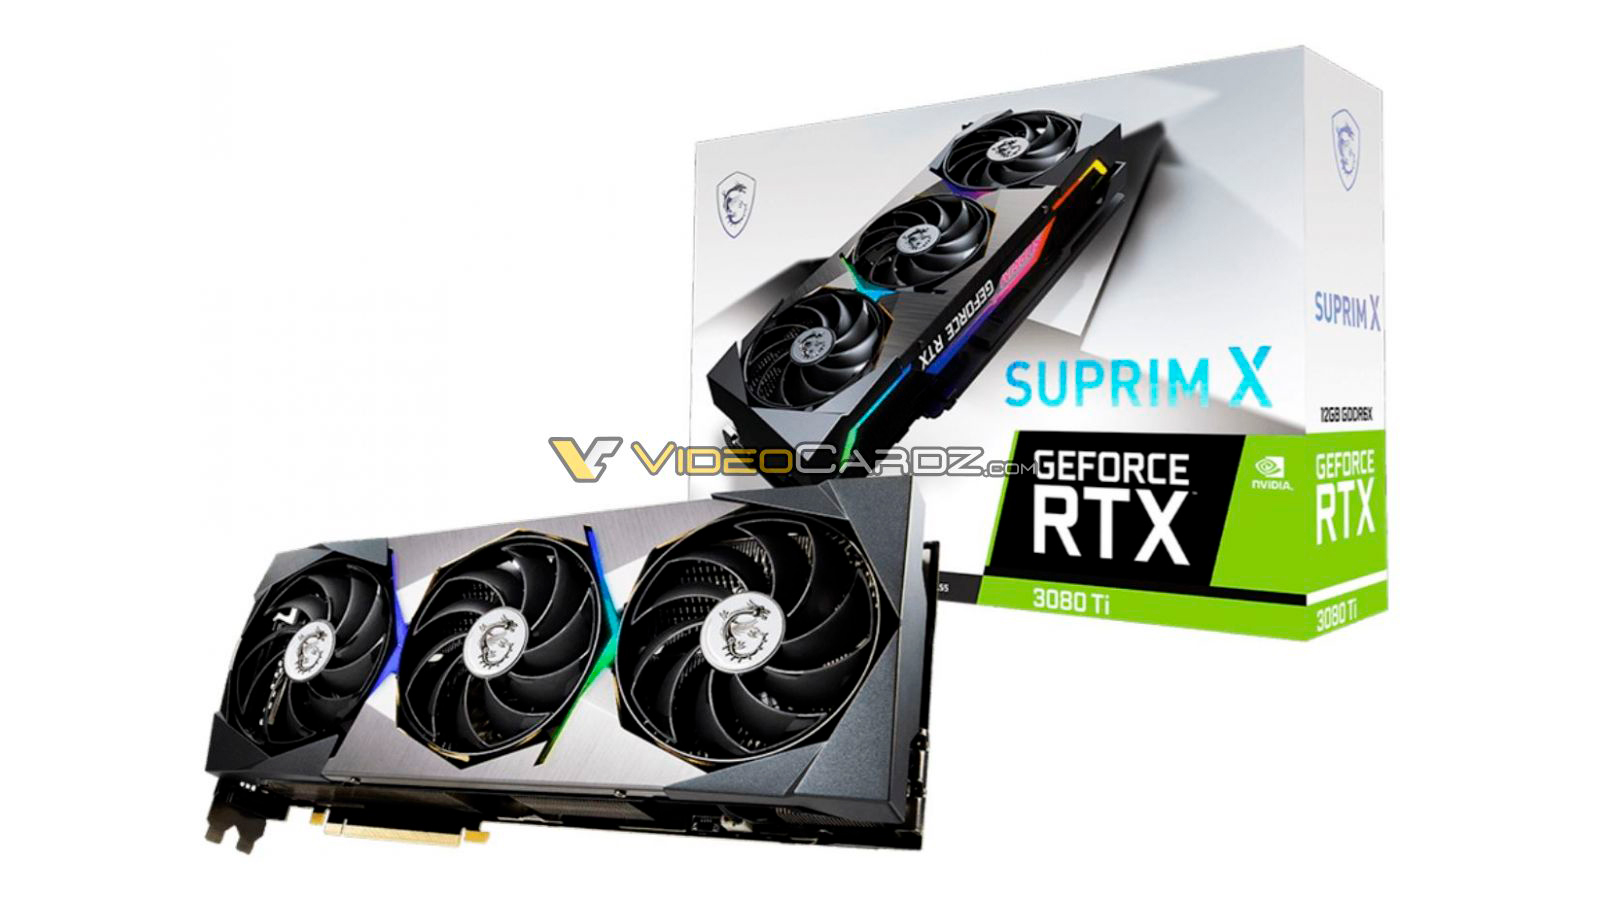 multiple-geforce-rtx-3080-ti-models-listed-for-more-than-$2,000